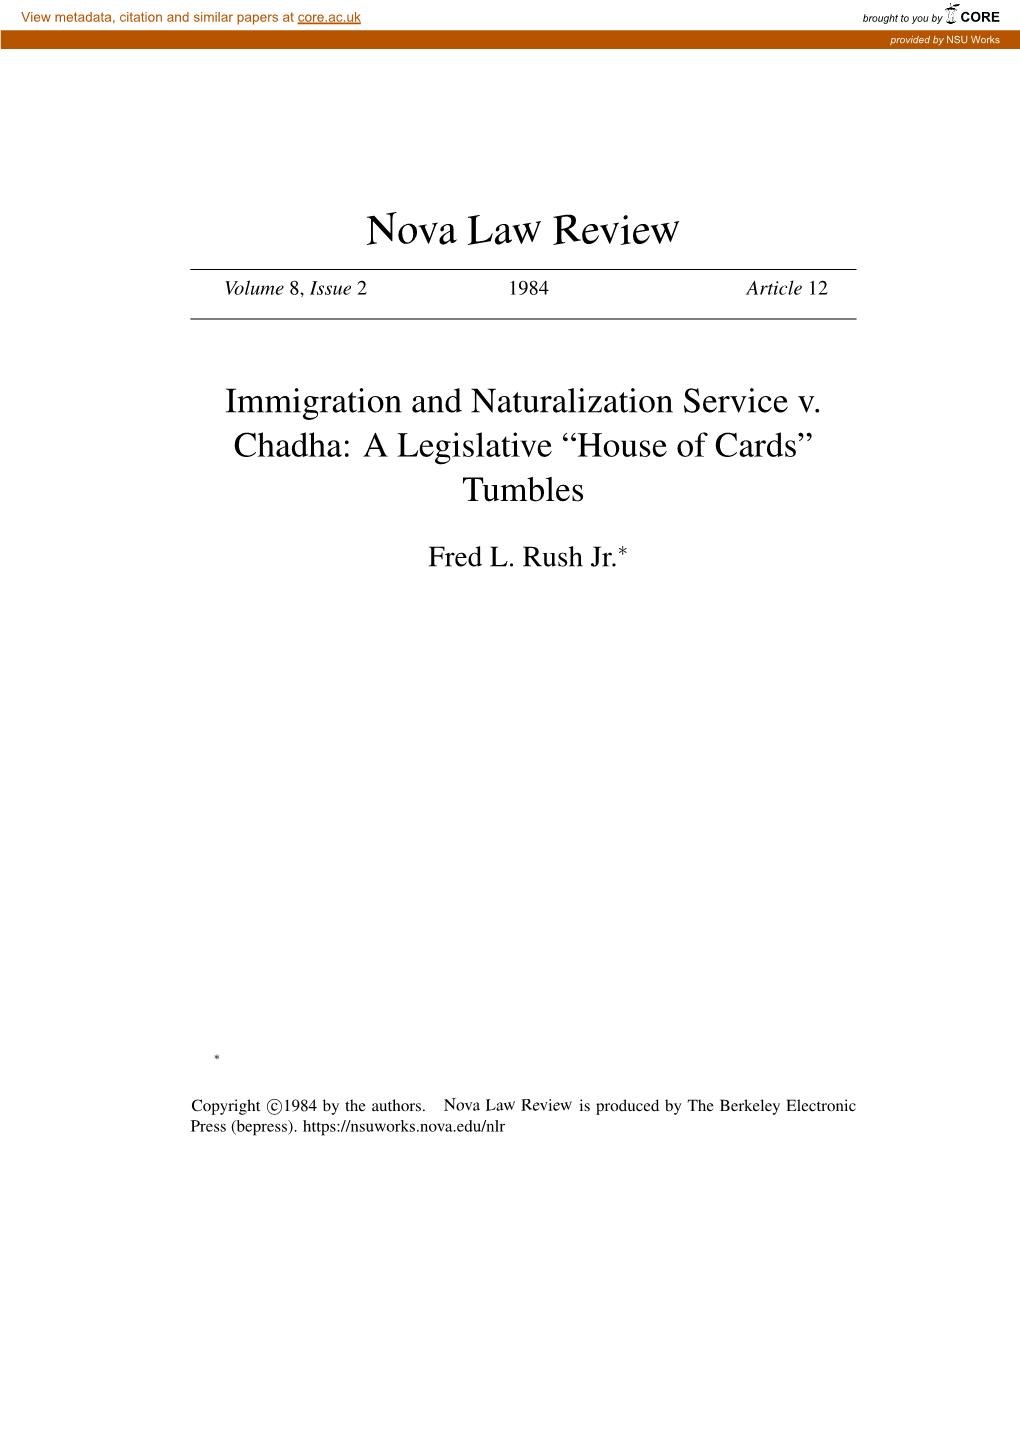 Immigration and Naturalization Service V. Chadha: a Legislative “House of Cards” Tumbles